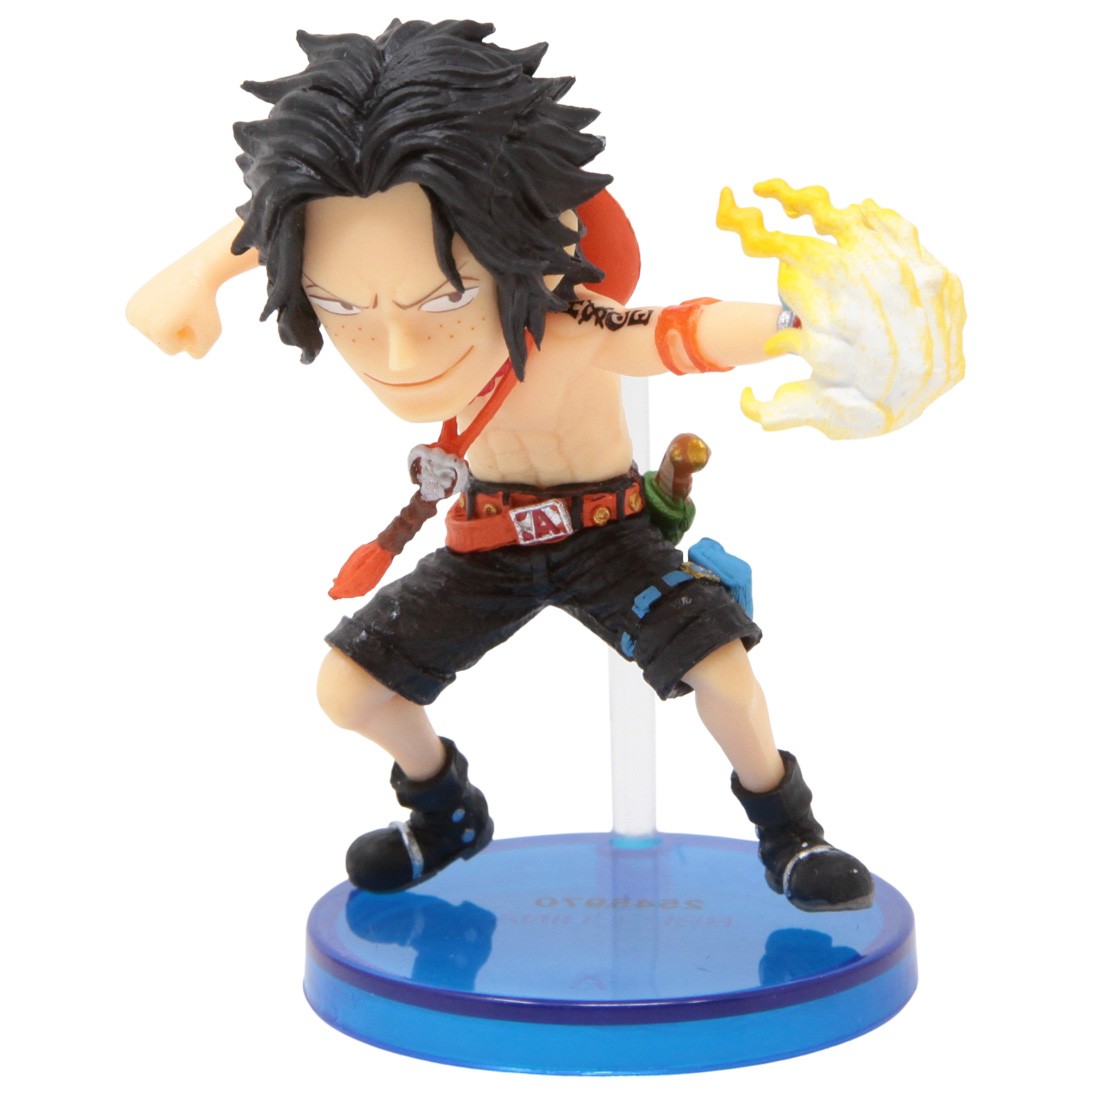 Amazon.com: UKAKA One Piece Portgas D Ace Figure, Anime Model Gift for Fans  : Toys & Games